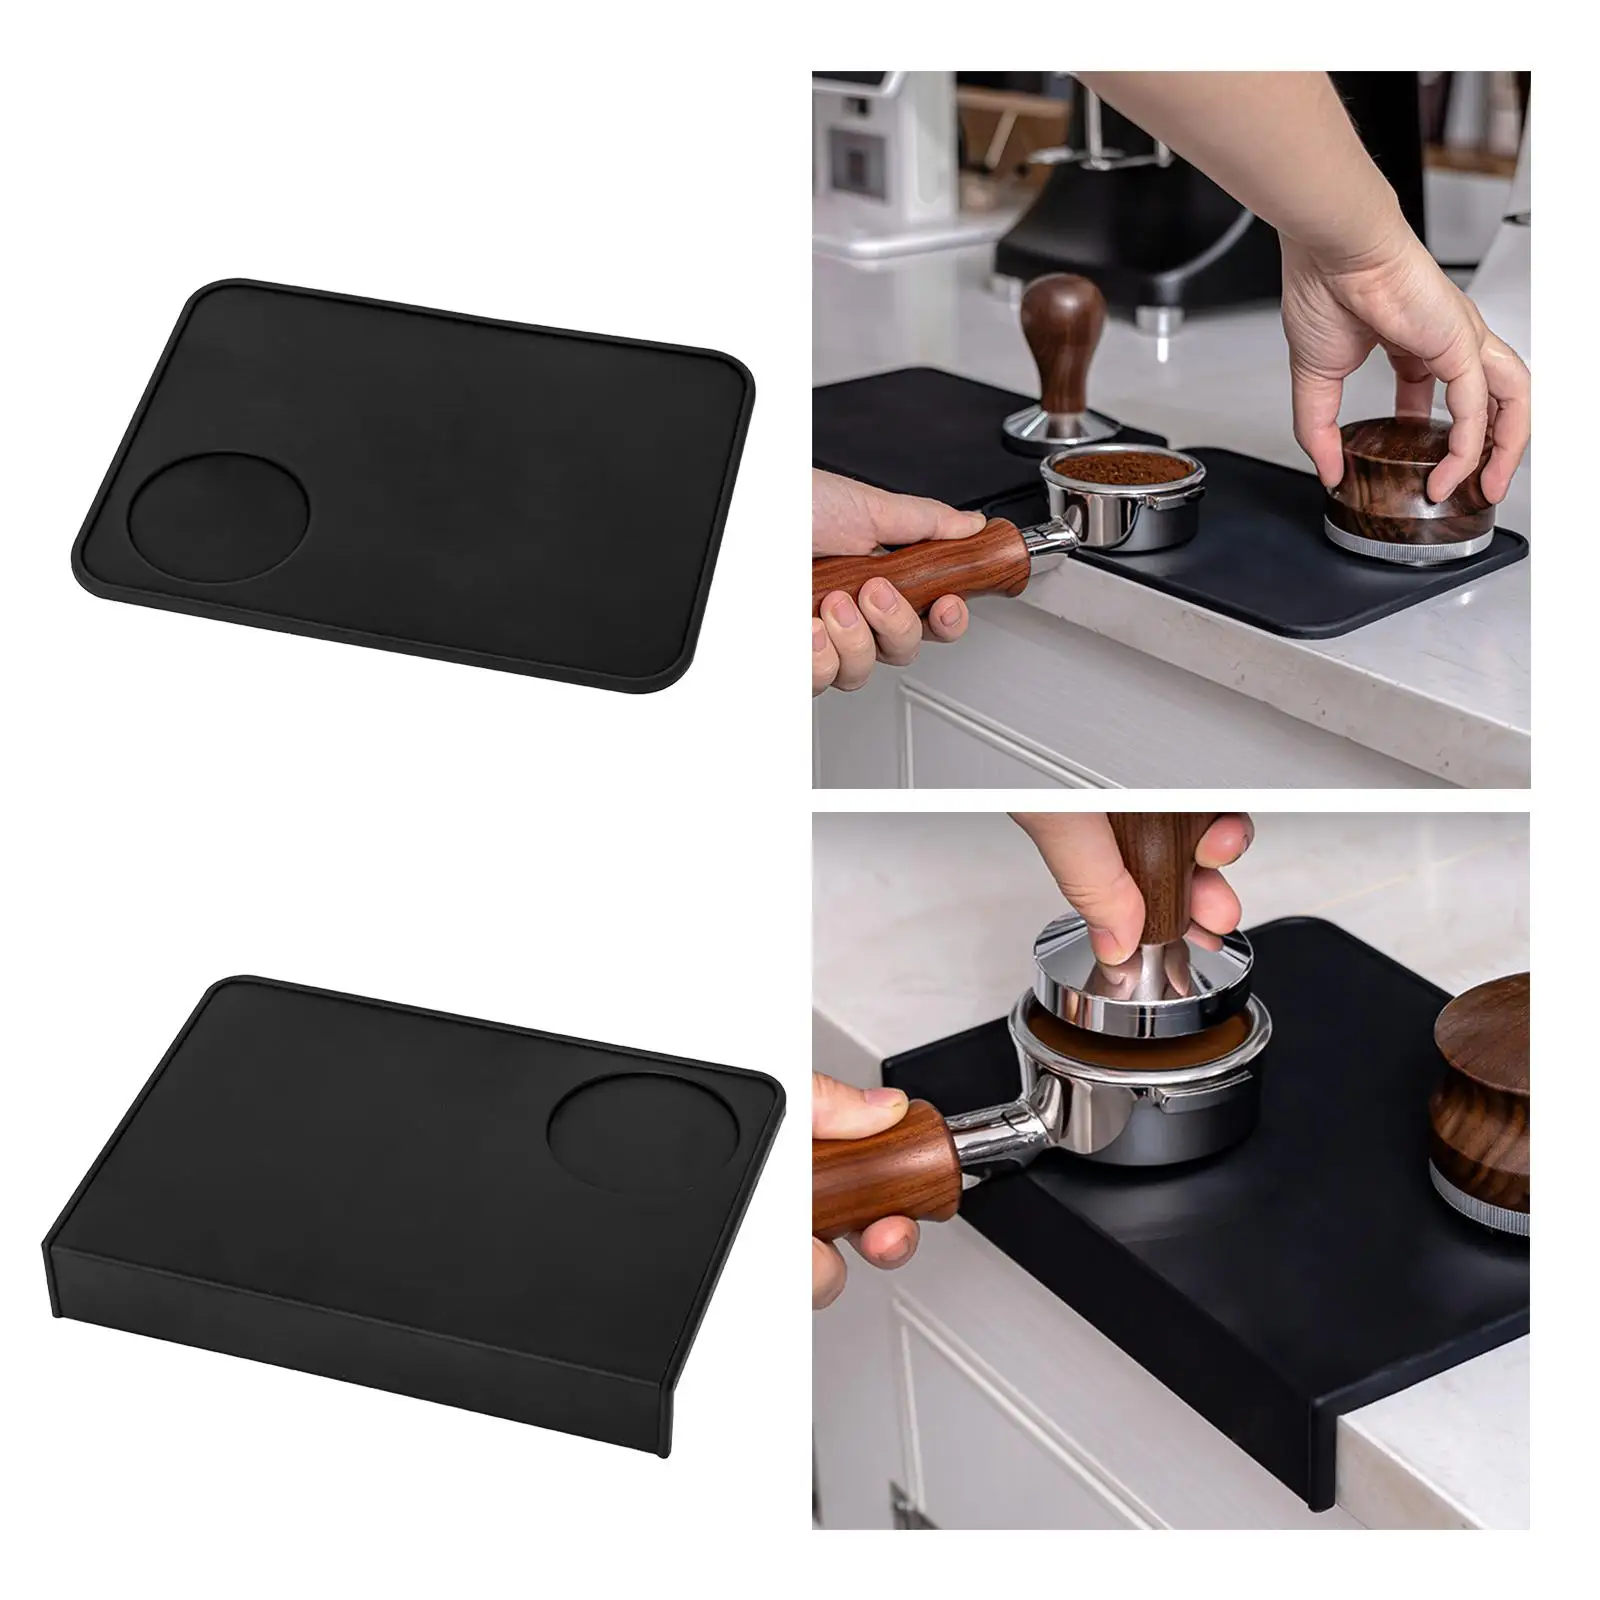 Coffee Tamper Mat Wear Resistant Barista Tool Multifunction Nonslip Professional for Worktop Home Kitchen Coffee Bar Office